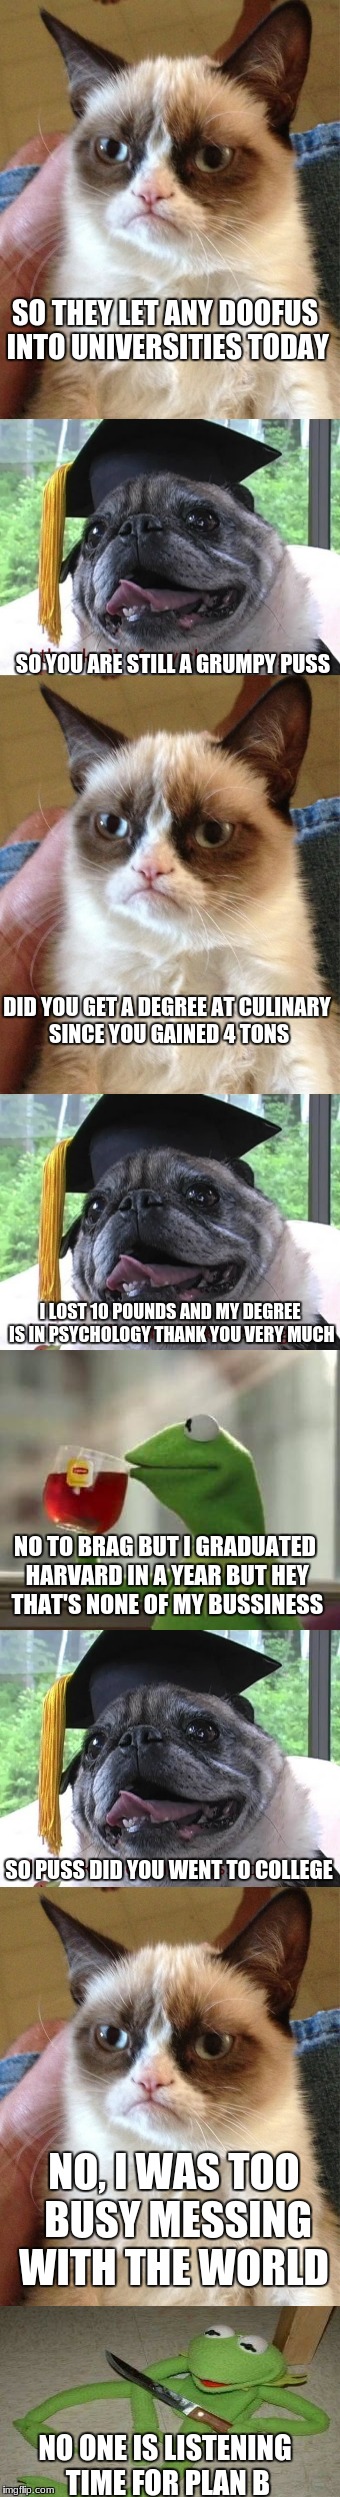 A late submission for frog week but hey it's still a meme right? | SO THEY LET ANY DOOFUS INTO UNIVERSITIES TODAY; SO YOU ARE STILL A GRUMPY PUSS; DID YOU GET A DEGREE AT CULINARY SINCE YOU GAINED 4 TONS; I LOST 10 POUNDS AND MY DEGREE IS IN PSYCHOLOGY THANK YOU VERY MUCH; NO TO BRAG BUT I GRADUATED HARVARD IN A YEAR BUT HEY THAT'S NONE OF MY BUSSINESS; SO PUSS DID YOU WENT TO COLLEGE; NO, I WAS TOO BUSY MESSING WITH THE WORLD; NO ONE IS LISTENING TIME FOR PLAN B | image tagged in memes,grumpy cat,kermit the frog,pugs,graduation,cutting | made w/ Imgflip meme maker